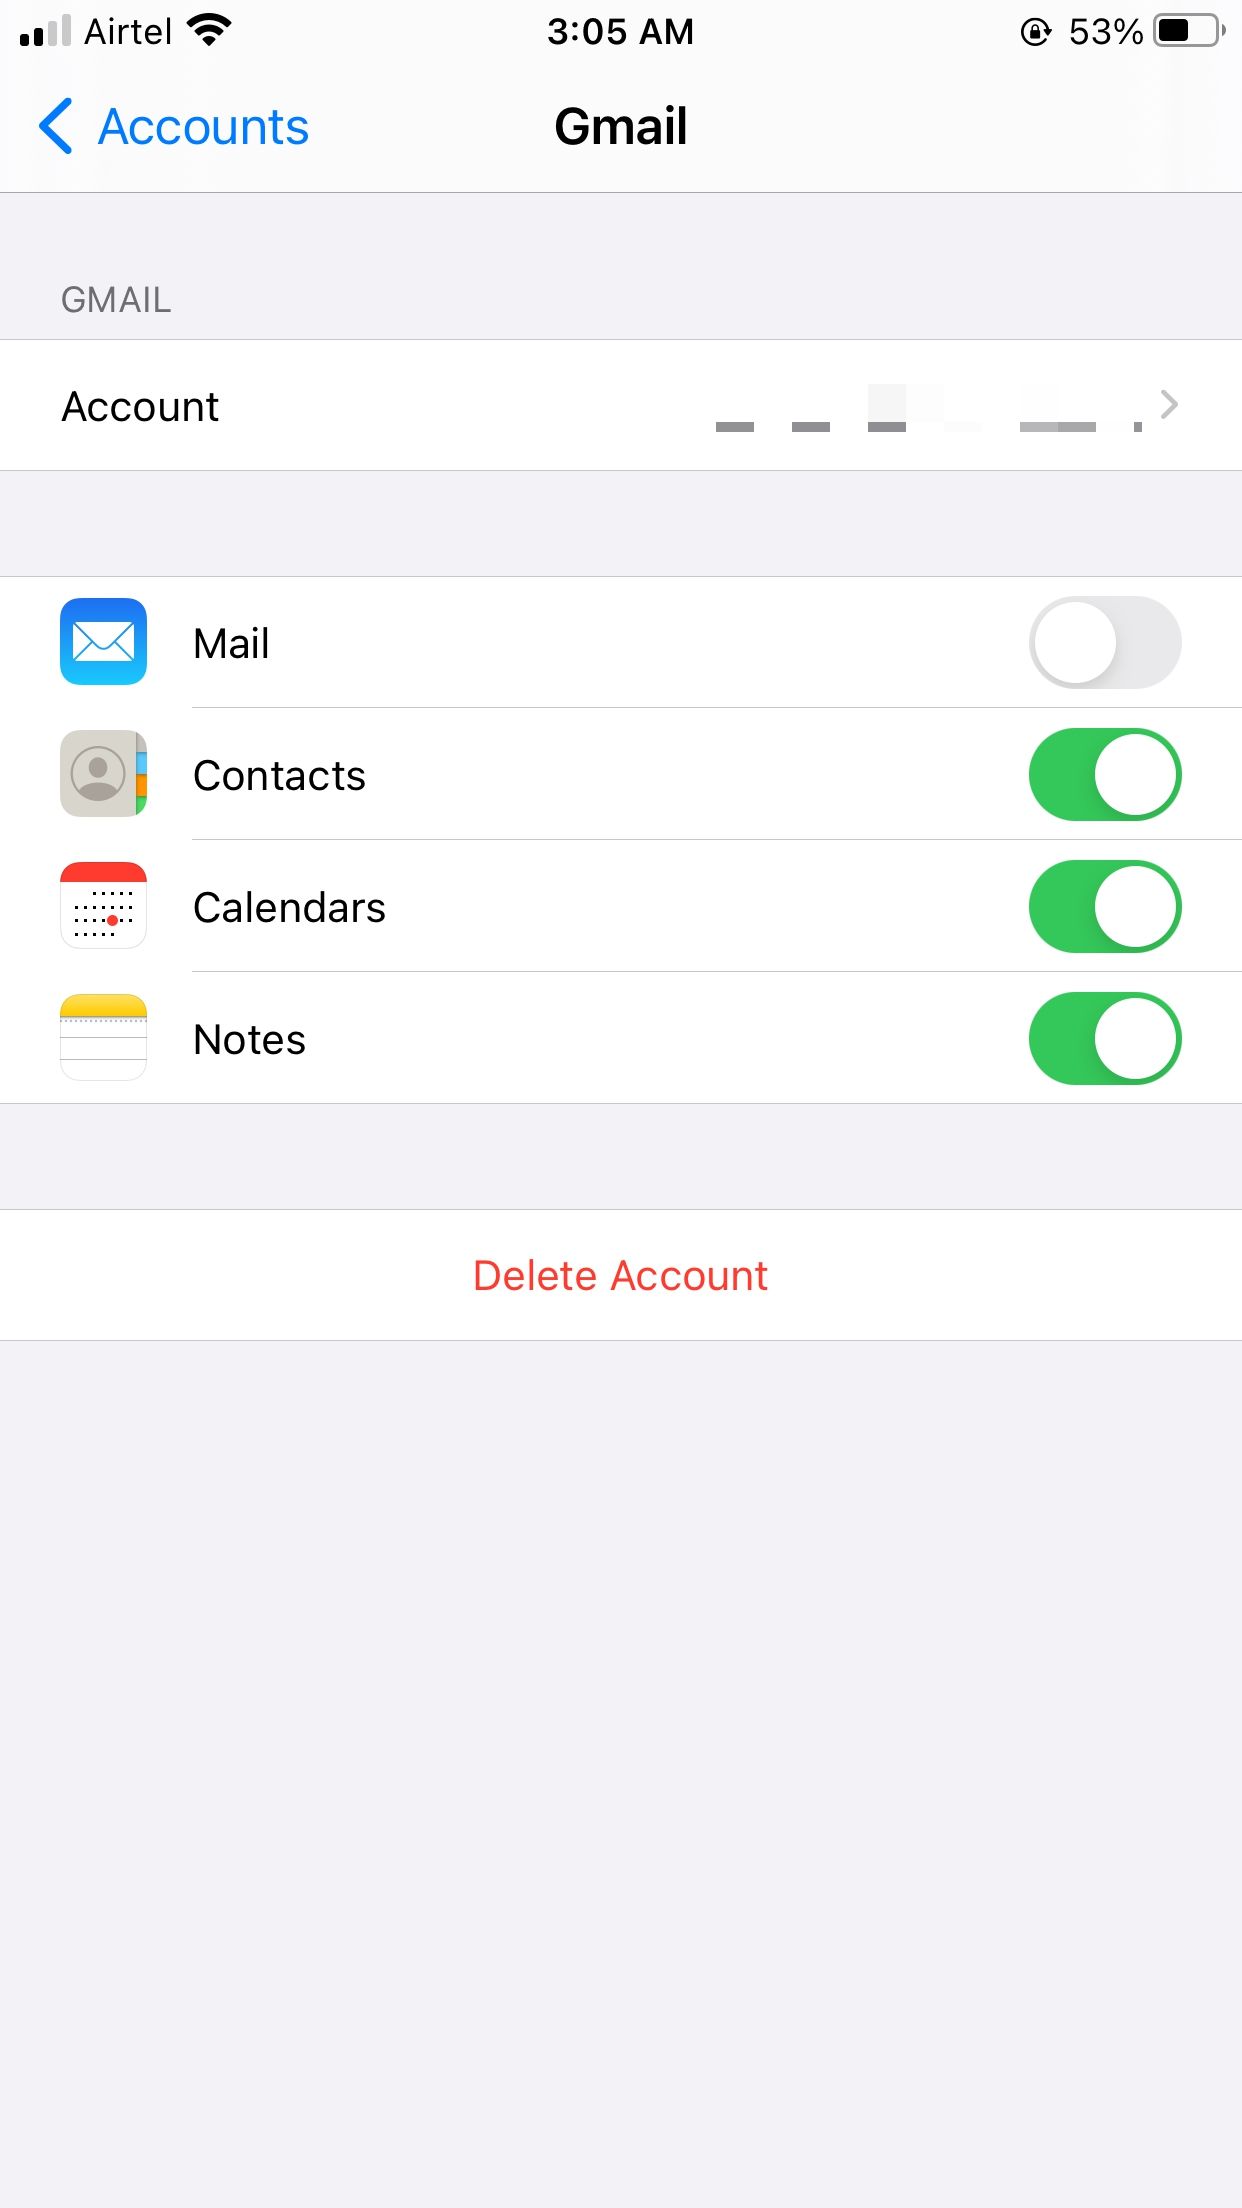 Confirm Notes App Toggle is enabled